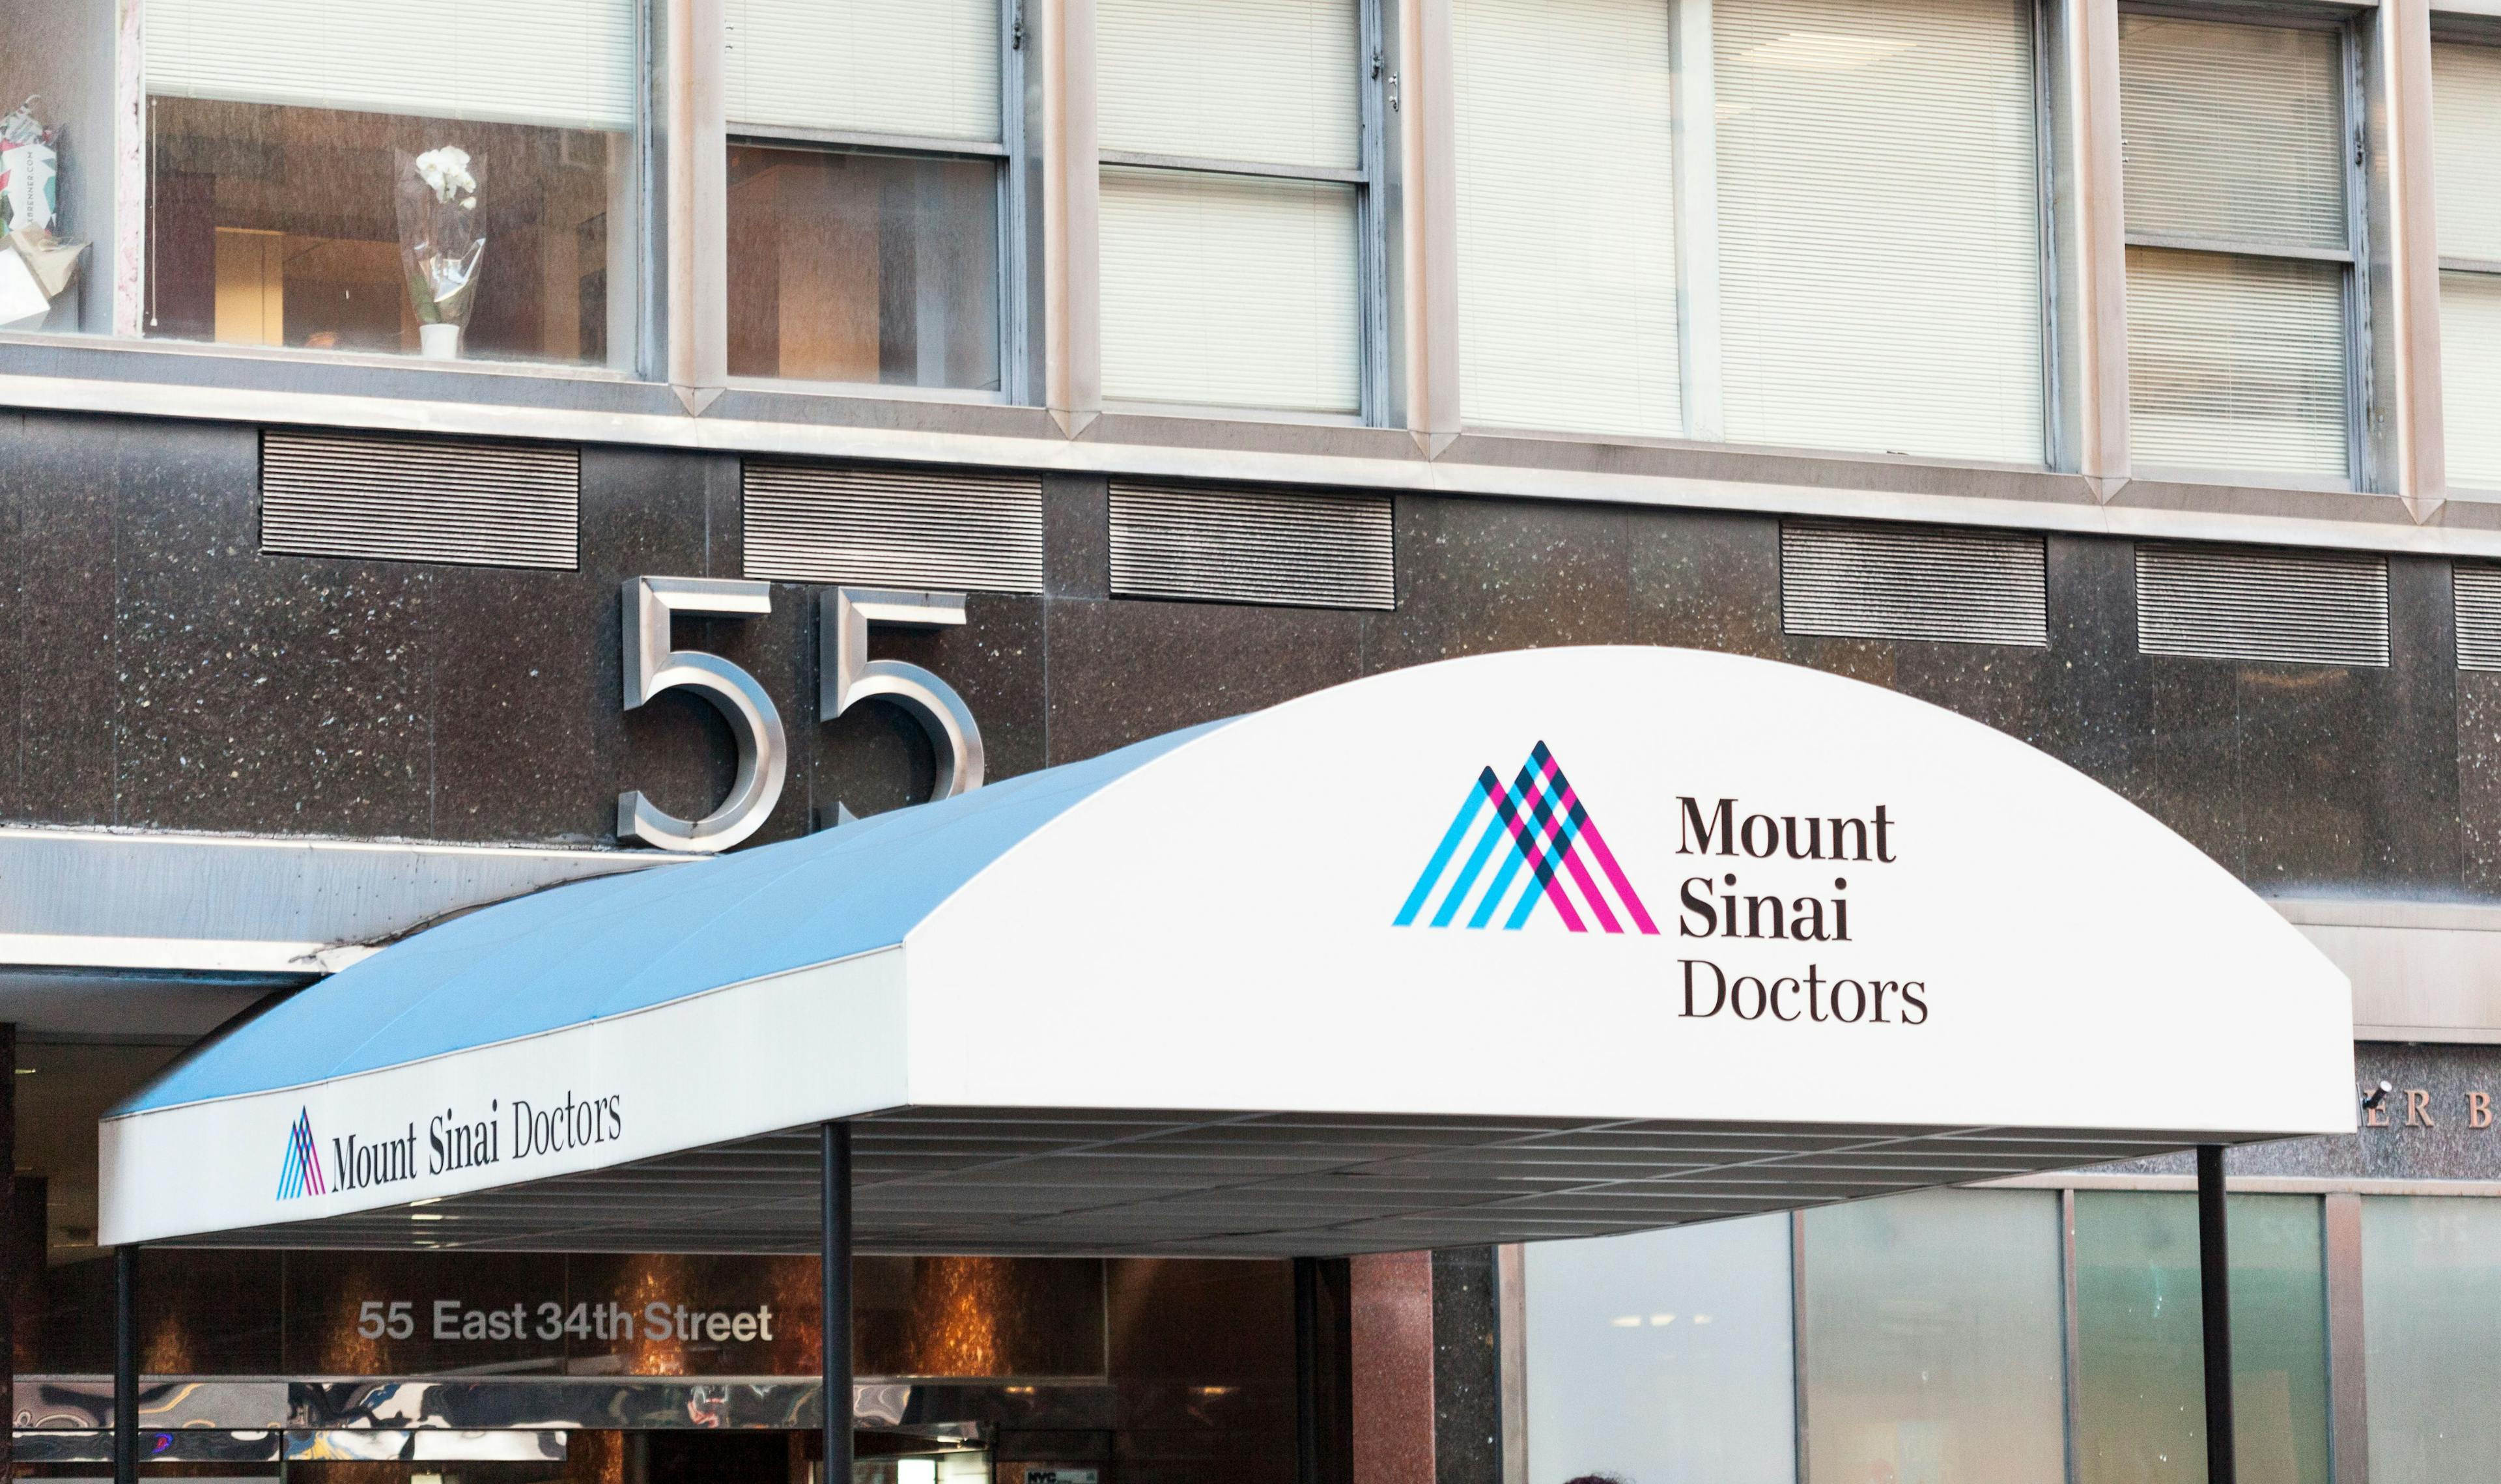 Icahn School of Medicine Partners With Clinique, Establishing the Mount Sinai-Clinique Healthy Skin Dermatology Center